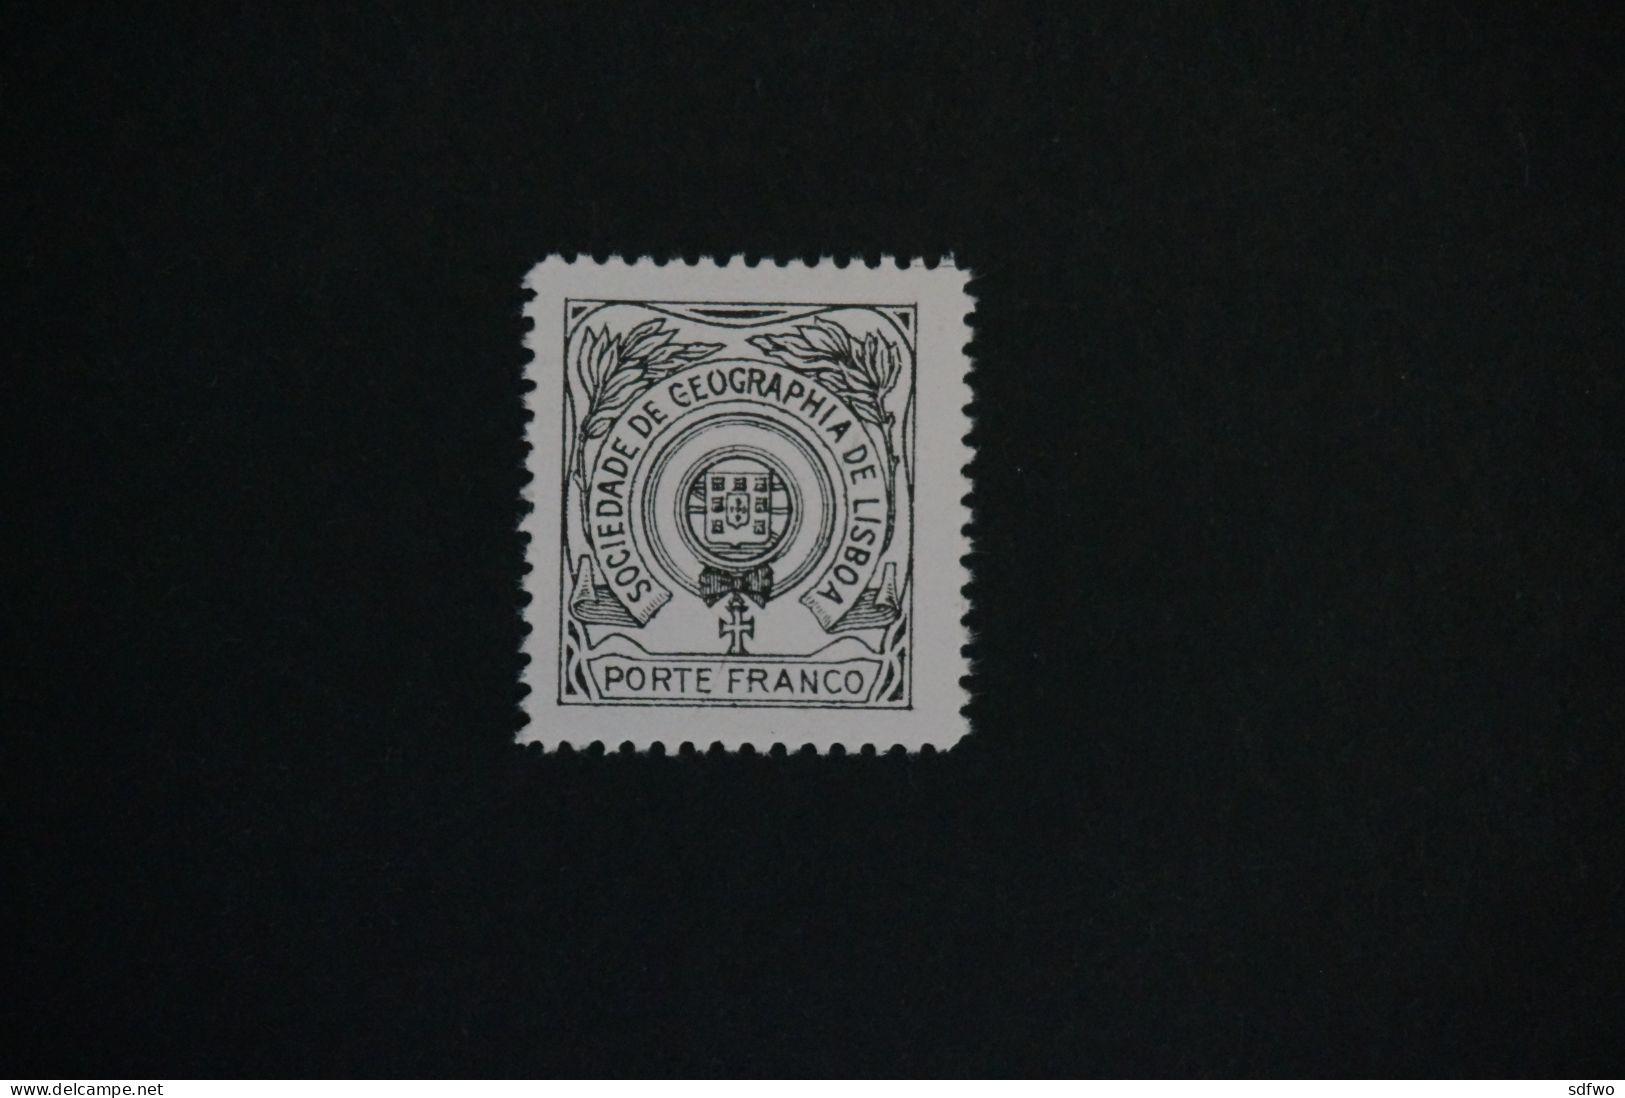 (T1) PORTUGAL - 1911/ 1920 SOCIETY GEOGRAFIA PERFORATED PROOF BOB (MNH) - Unused Stamps